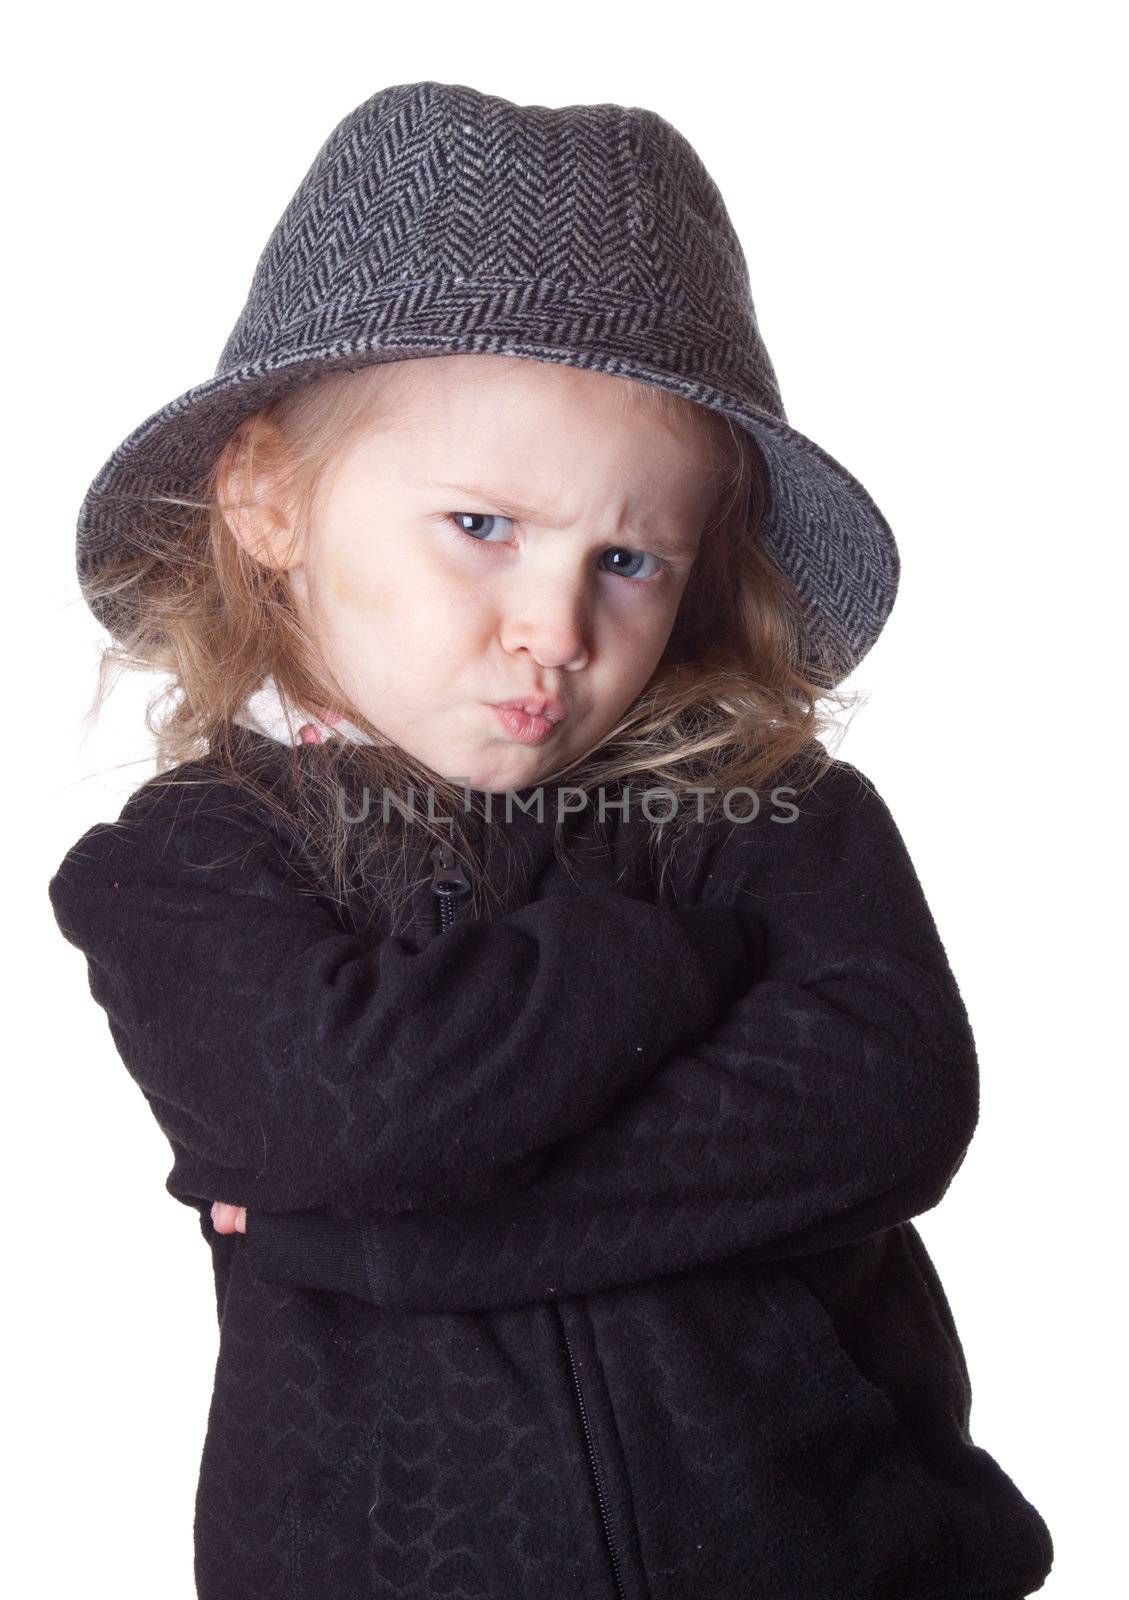 An isolation of a child on white.  Her lips are pursed and she is very serious.  Way too cool.